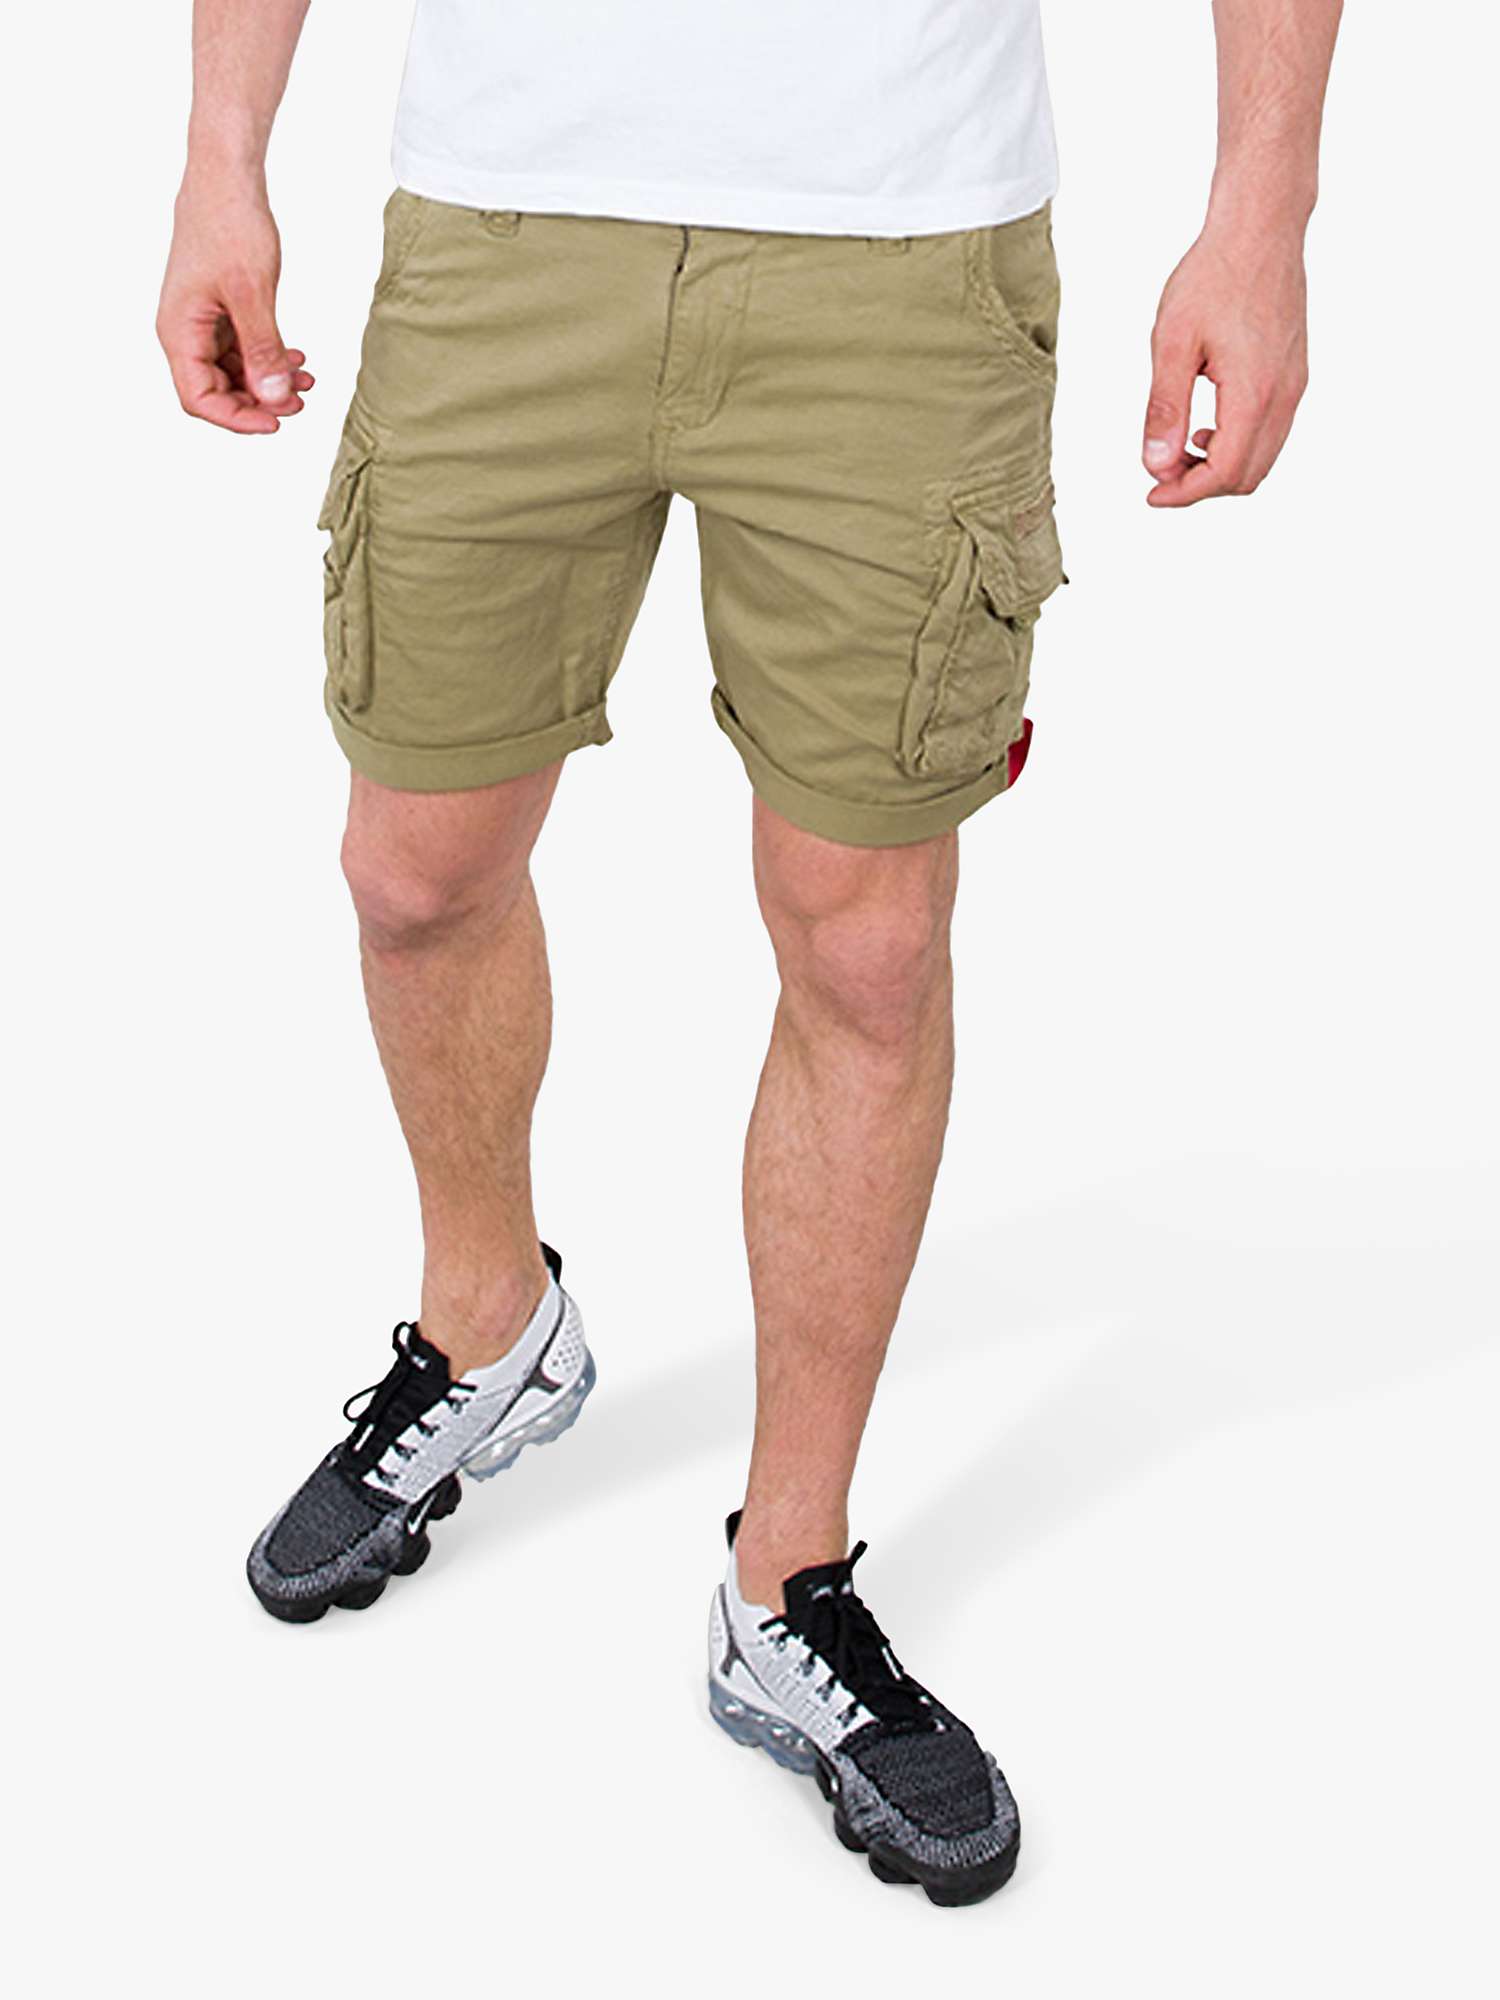 Alpha Industries Lewis Partners Crew John Shorts, at Cargo & Olive Light 82